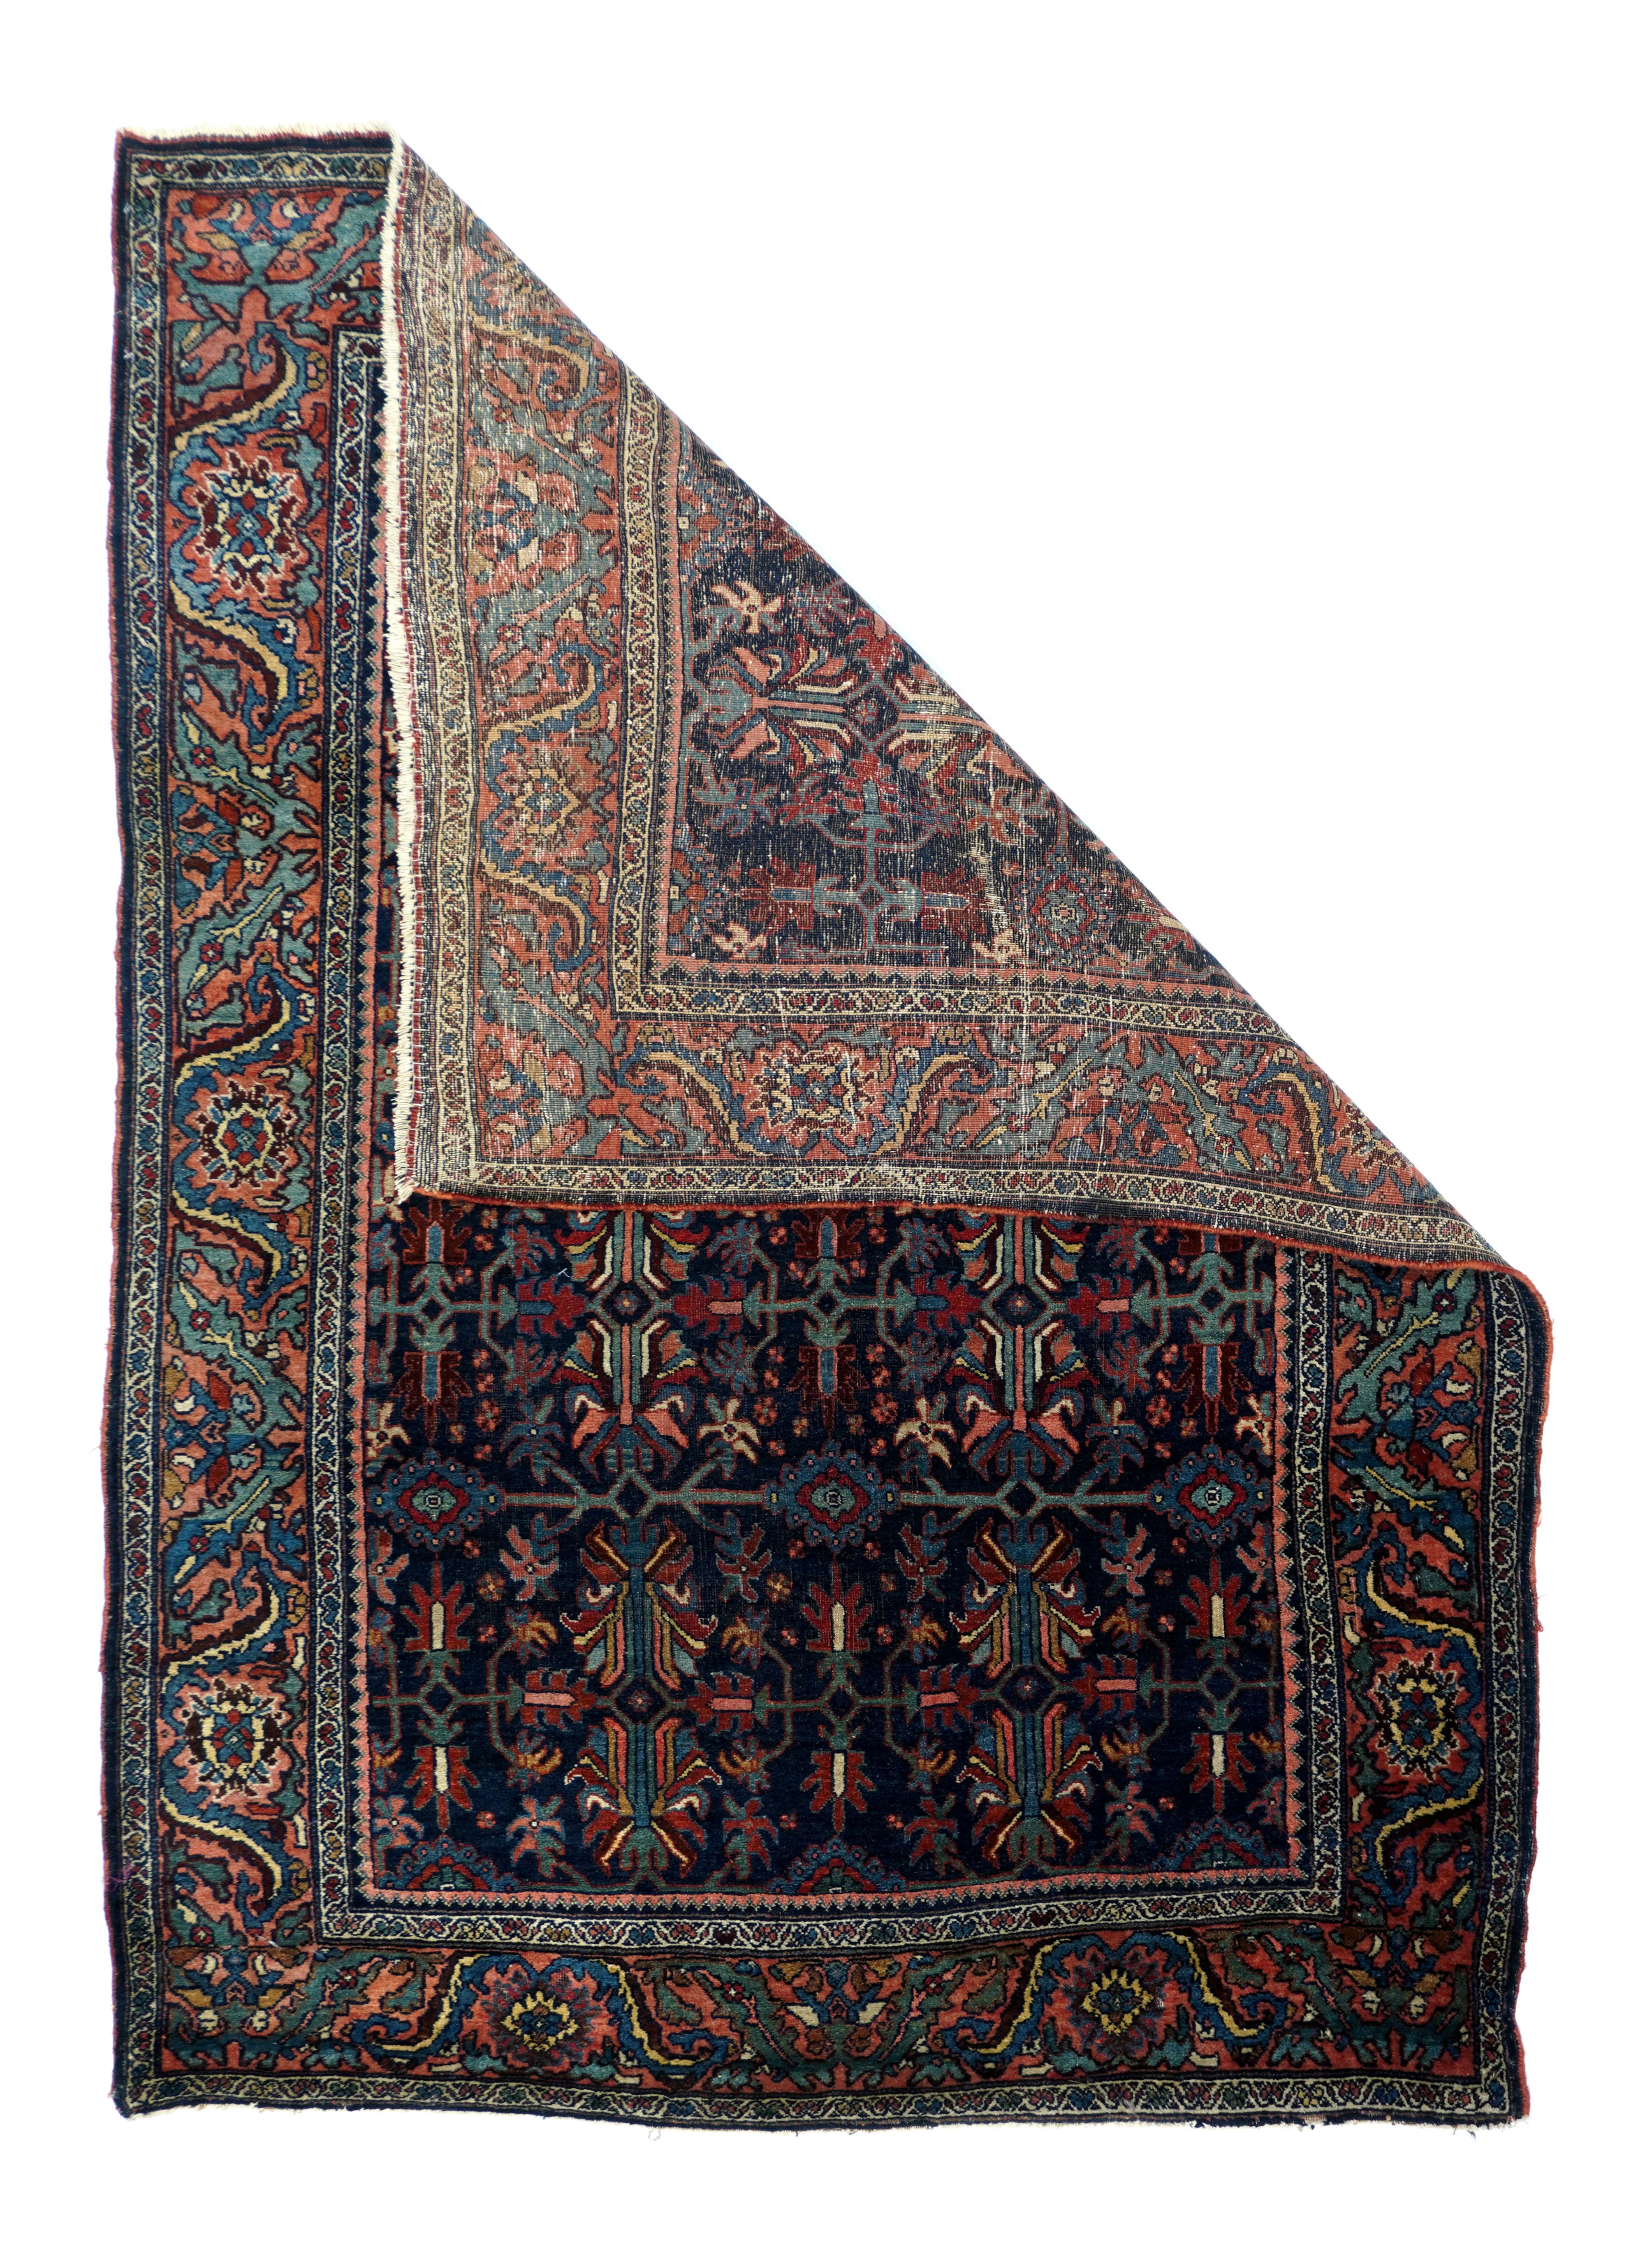 Antique Bidjar rug. Meaures: 4.4'' x 6.4''. The rich indigo navy field shows an end-to-end, two column layout of paired, facing thin petal palmettes in a suggested square lattice with blue lappet-fringed lozenges at the crossings. Rose main border